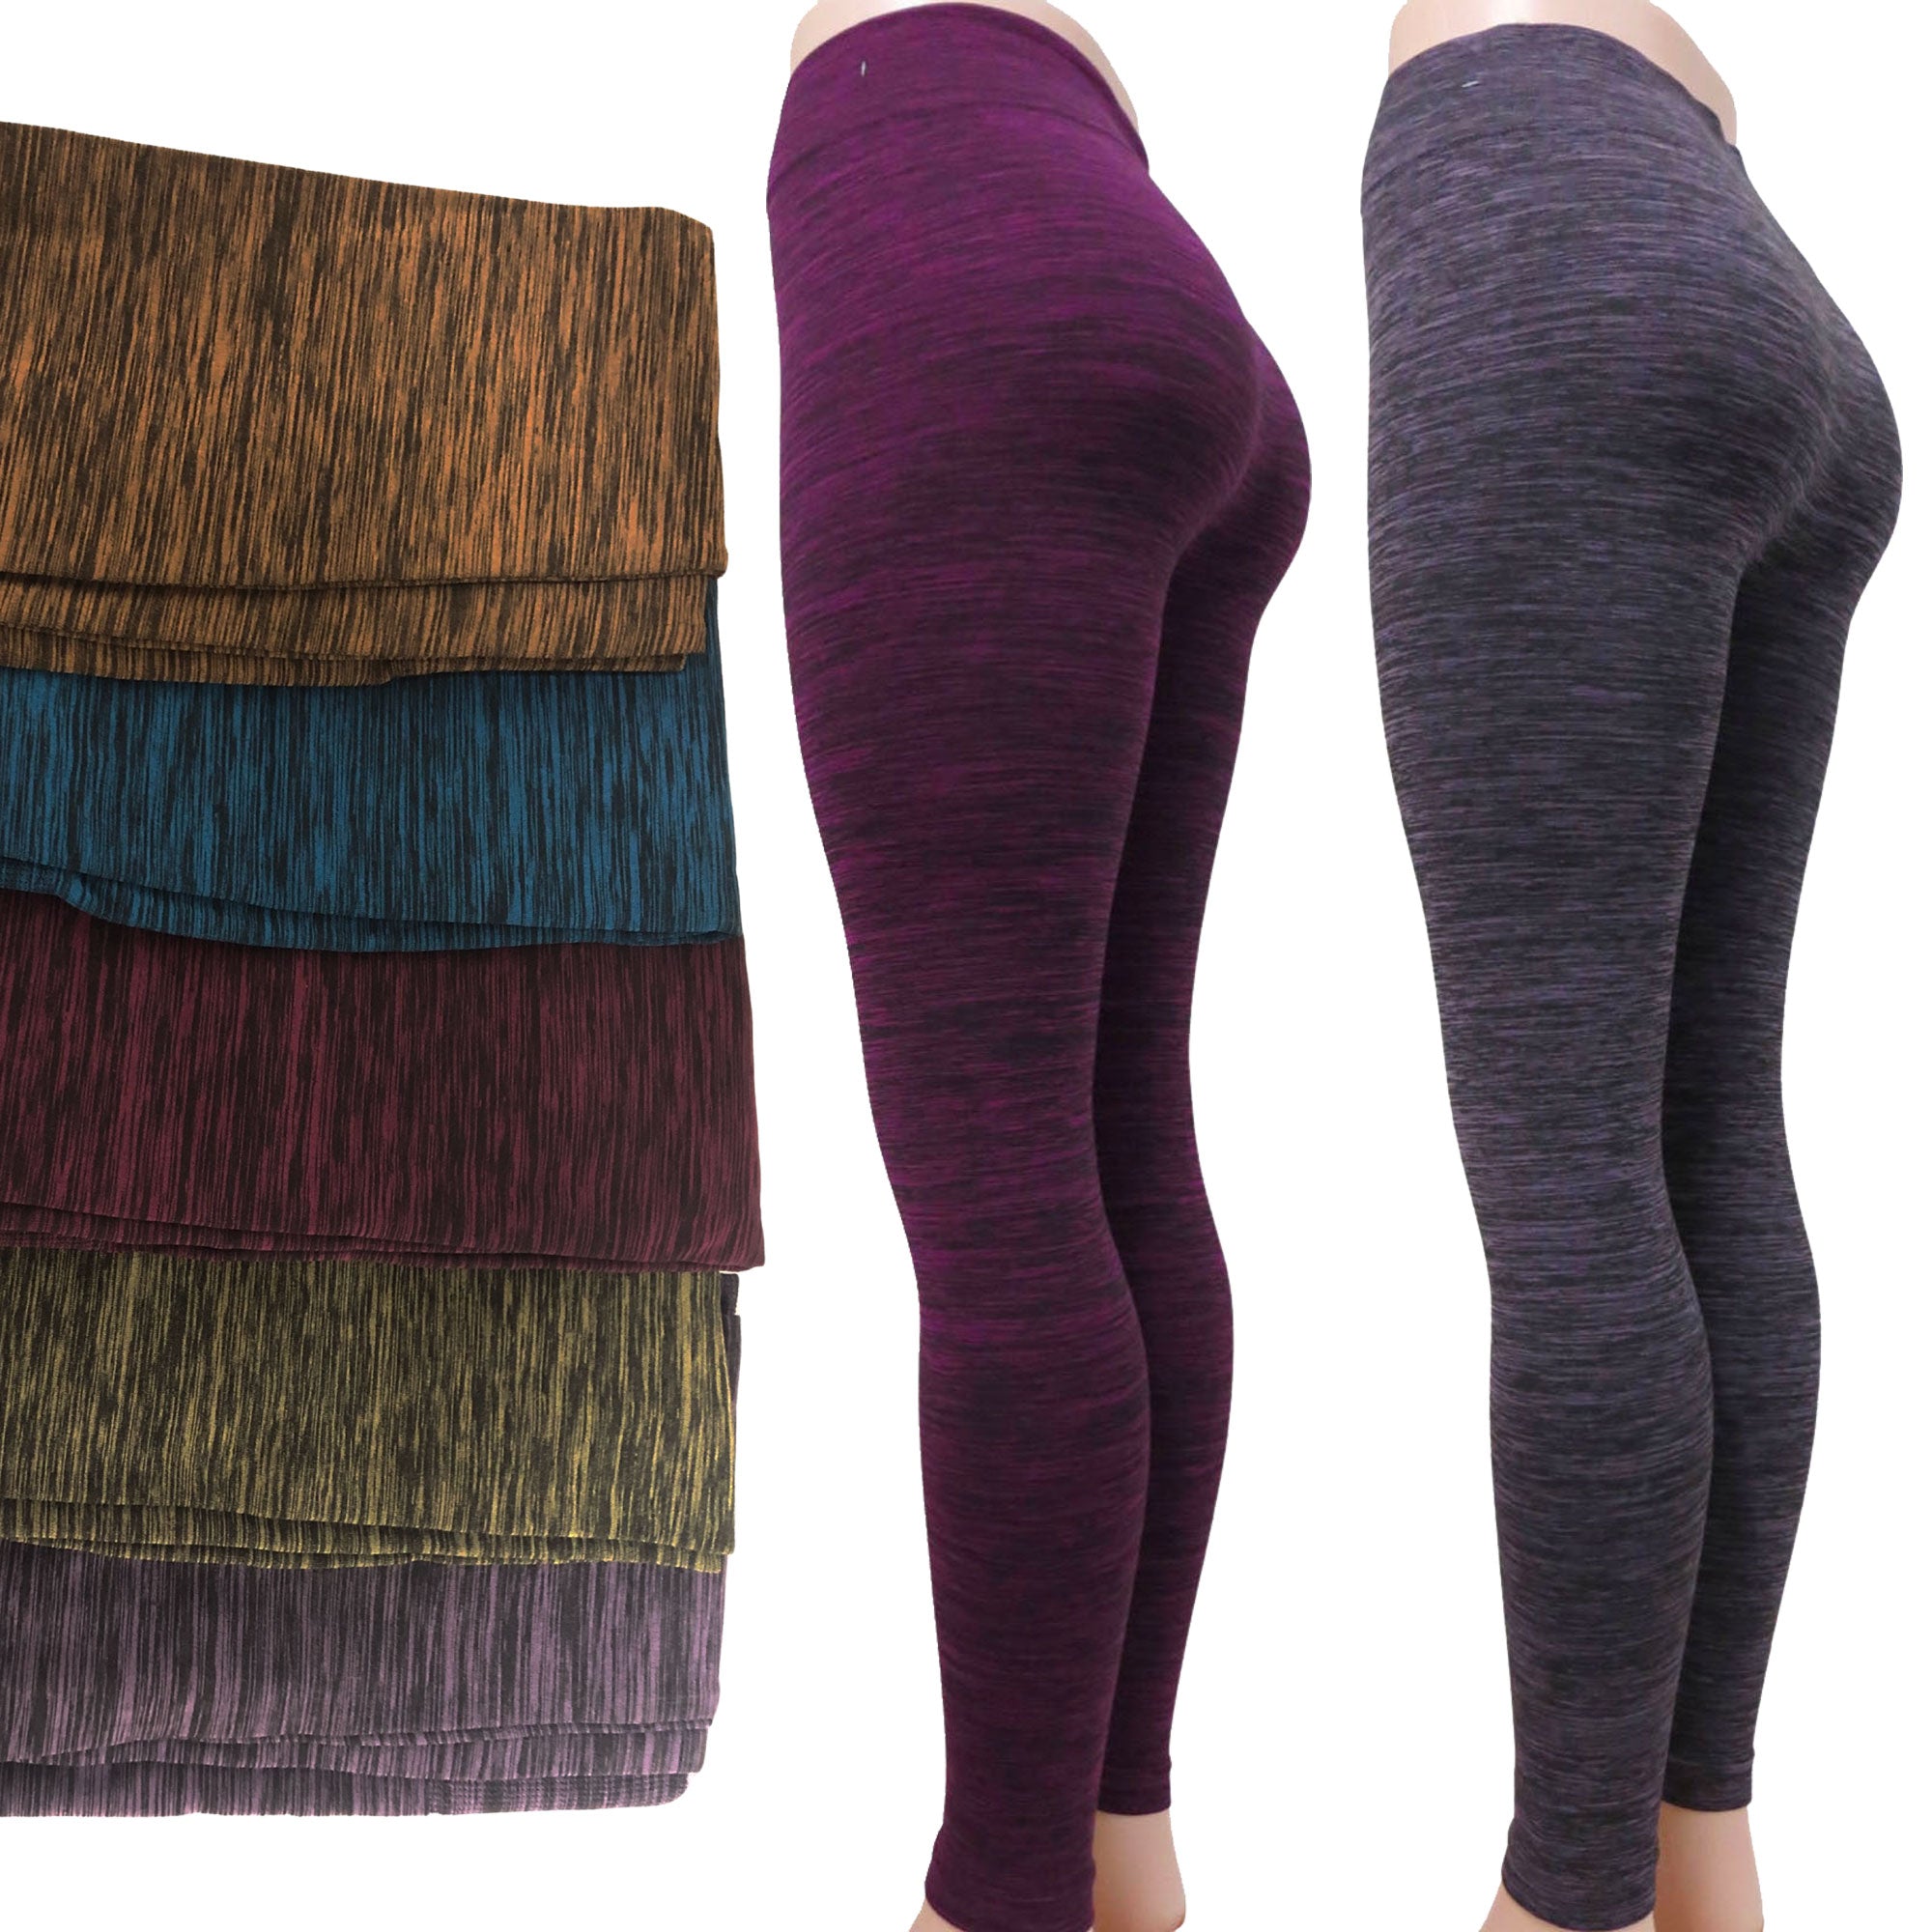 48 Pieces Women's Fashion Leggings - Assorted Solid Colors - Womens Leggings  - at 